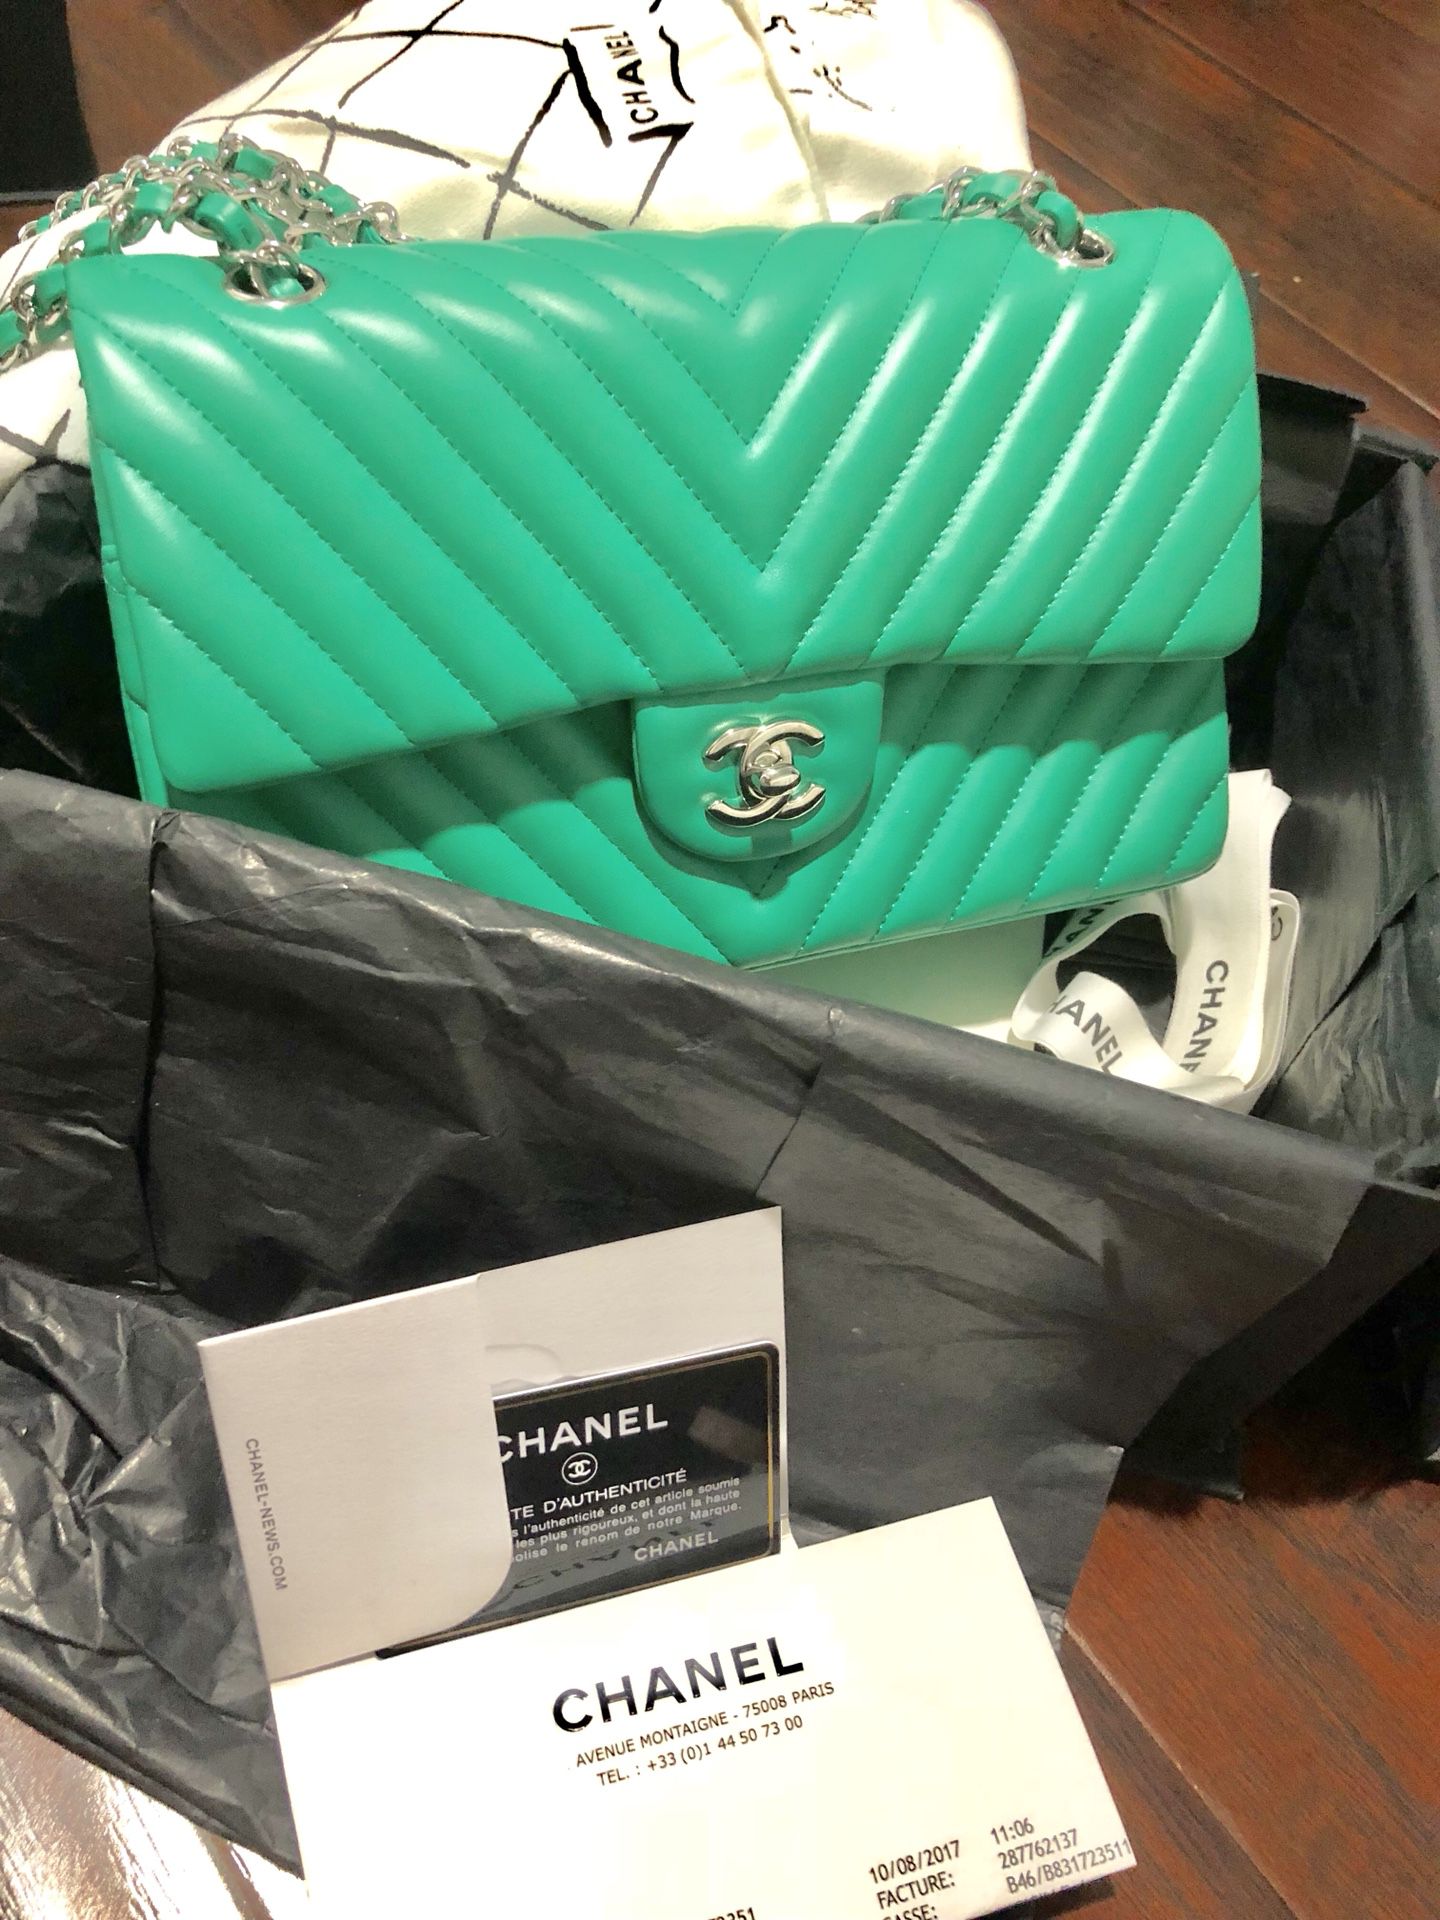 Chanel classic medium teal green bag purse for Sale in Milpitas